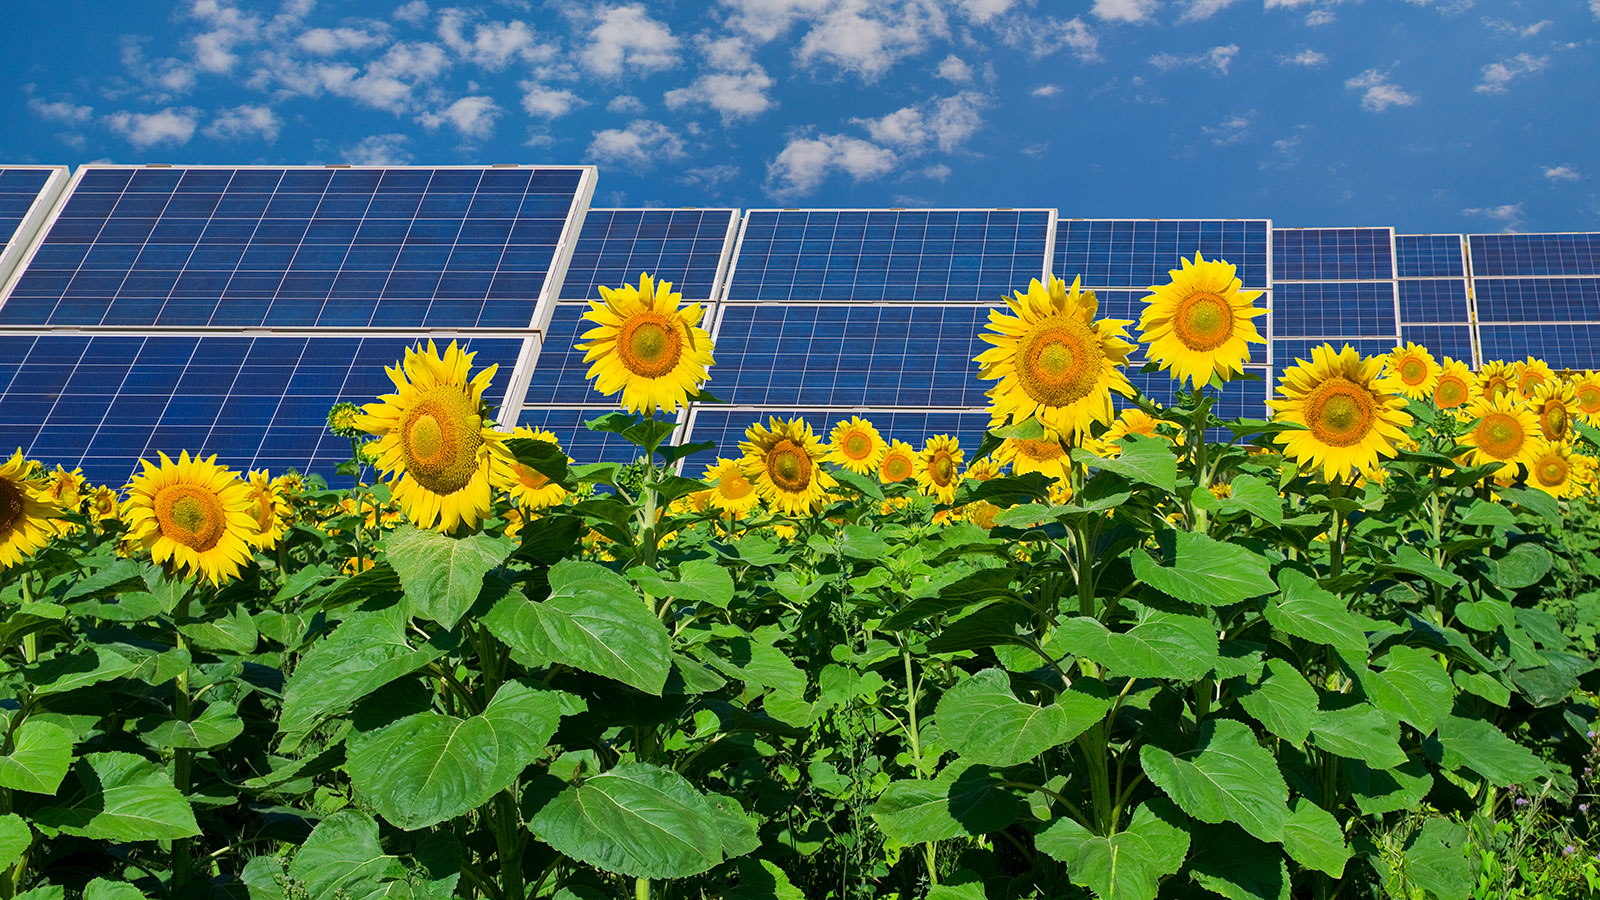 Sunflowers in front of solar panels